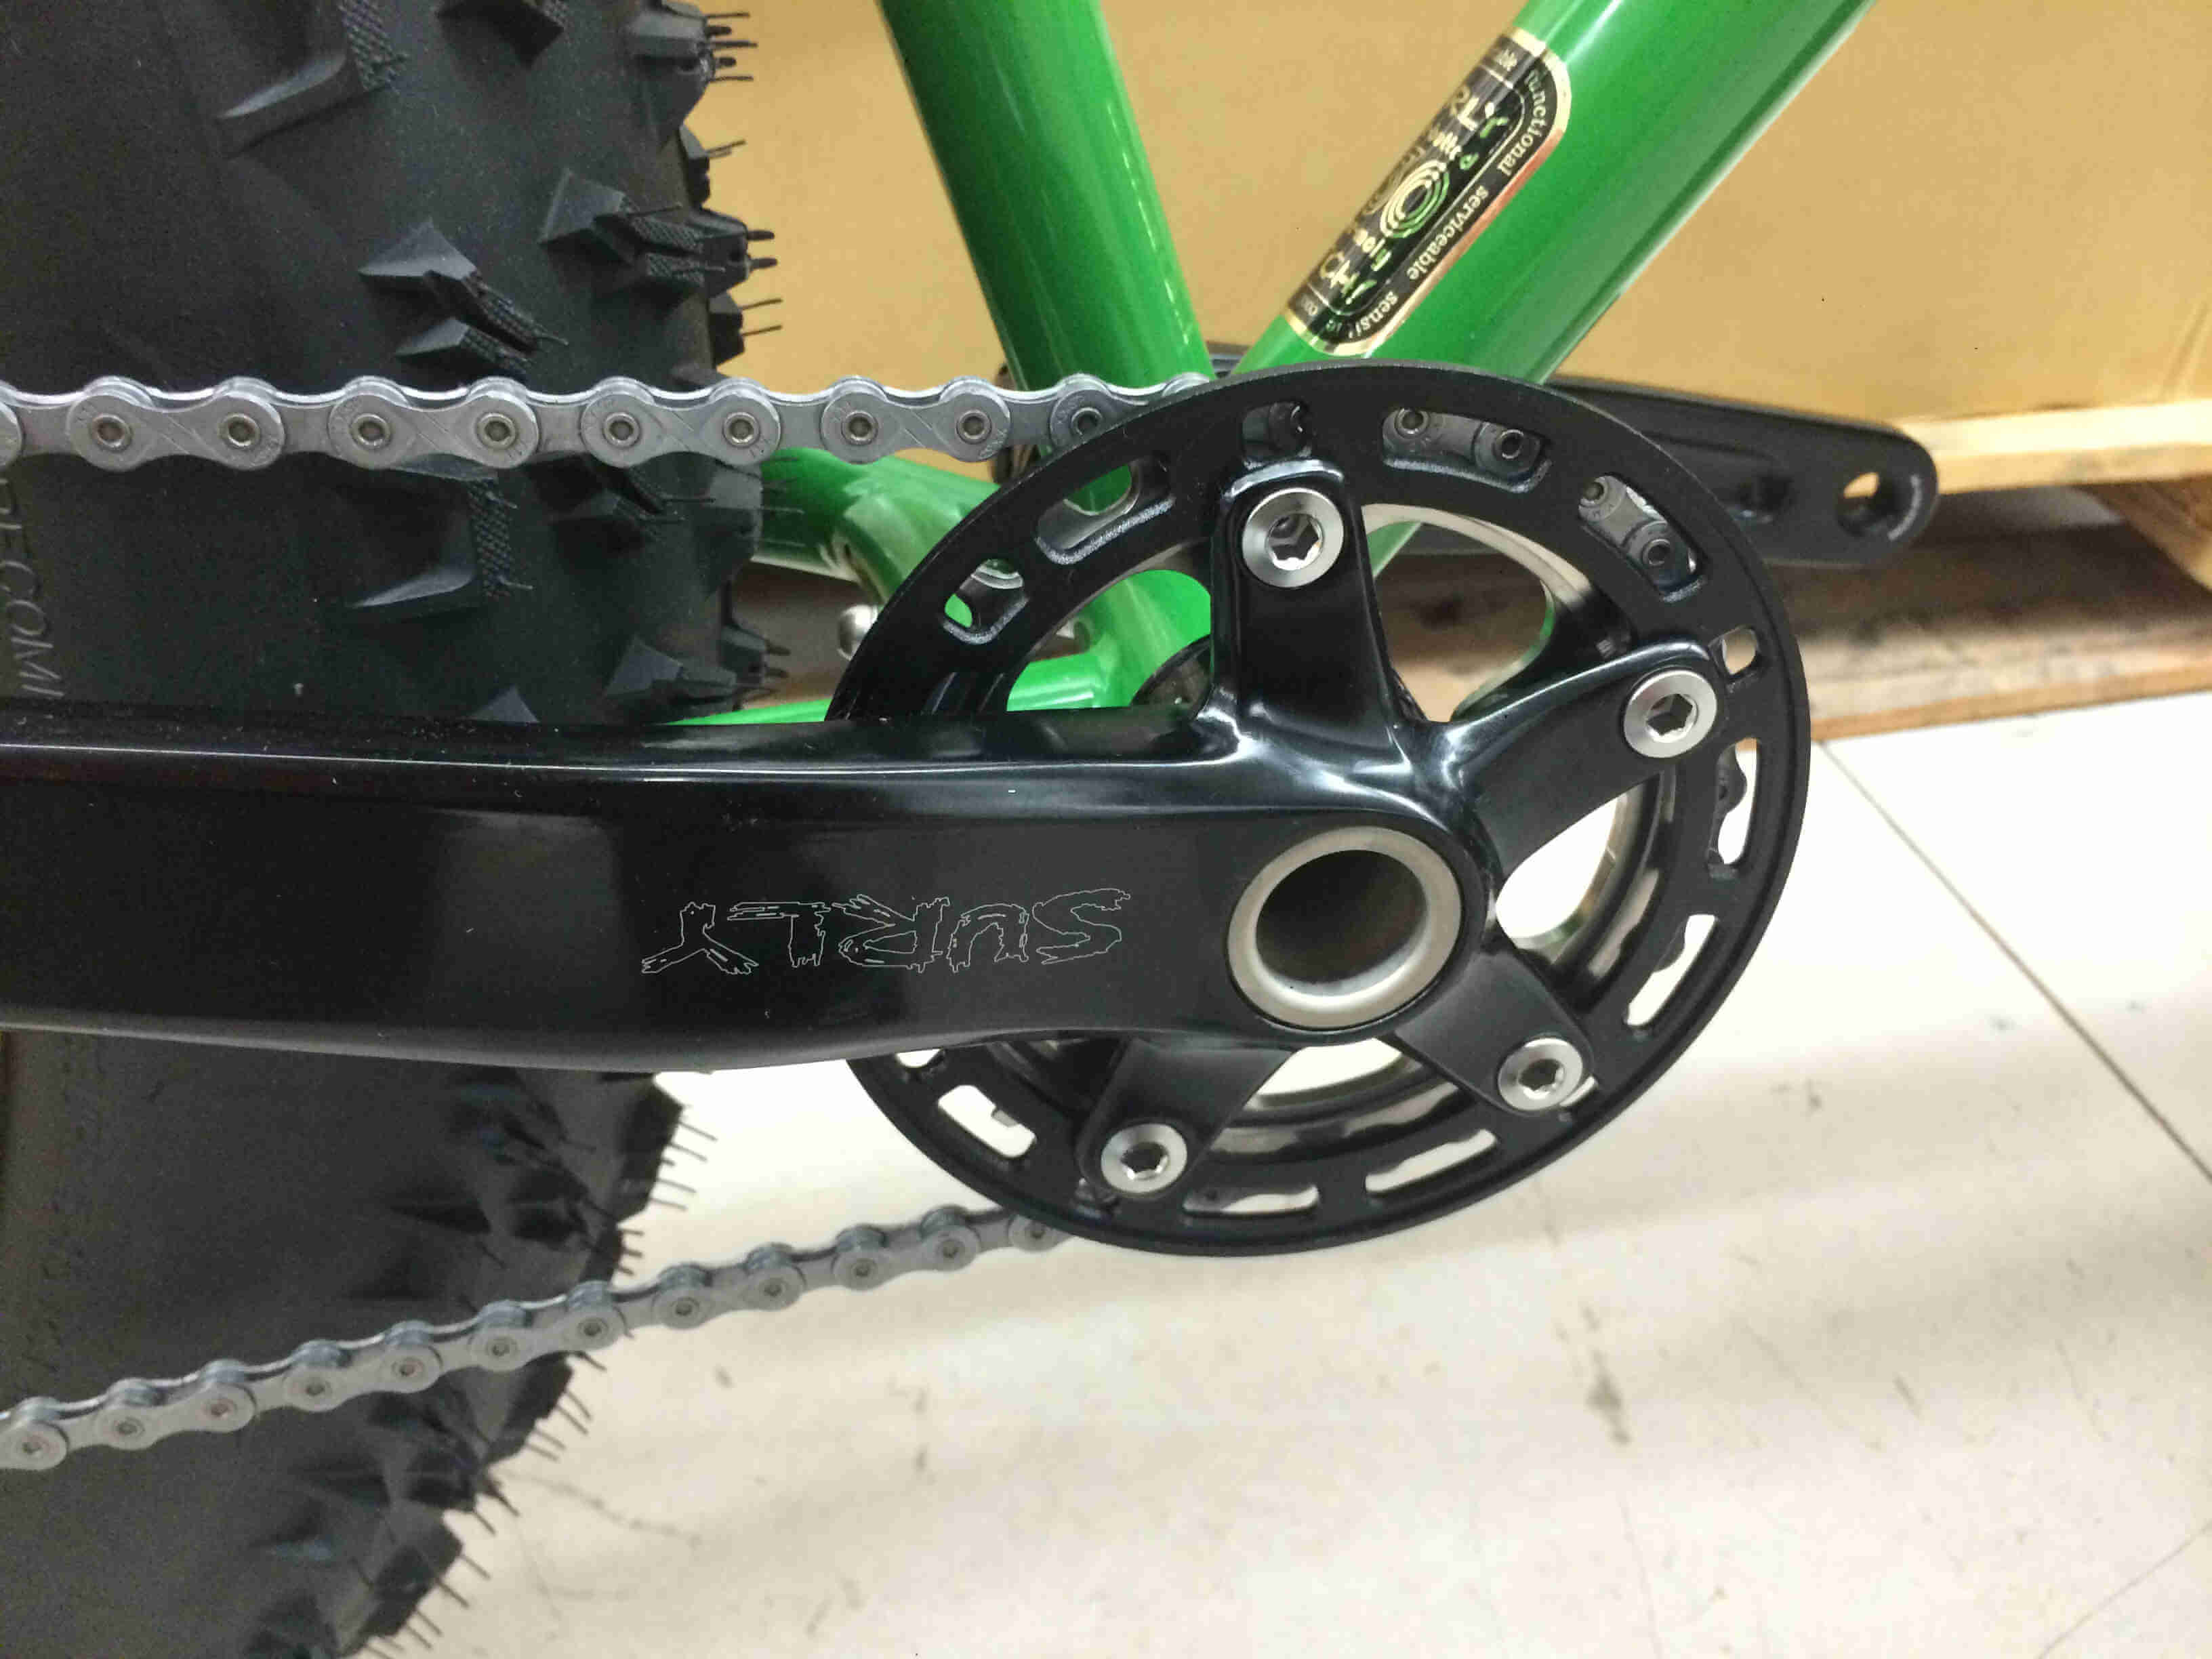 Close up, right side view of the crank and chainring of a green Surly Moonlander bike